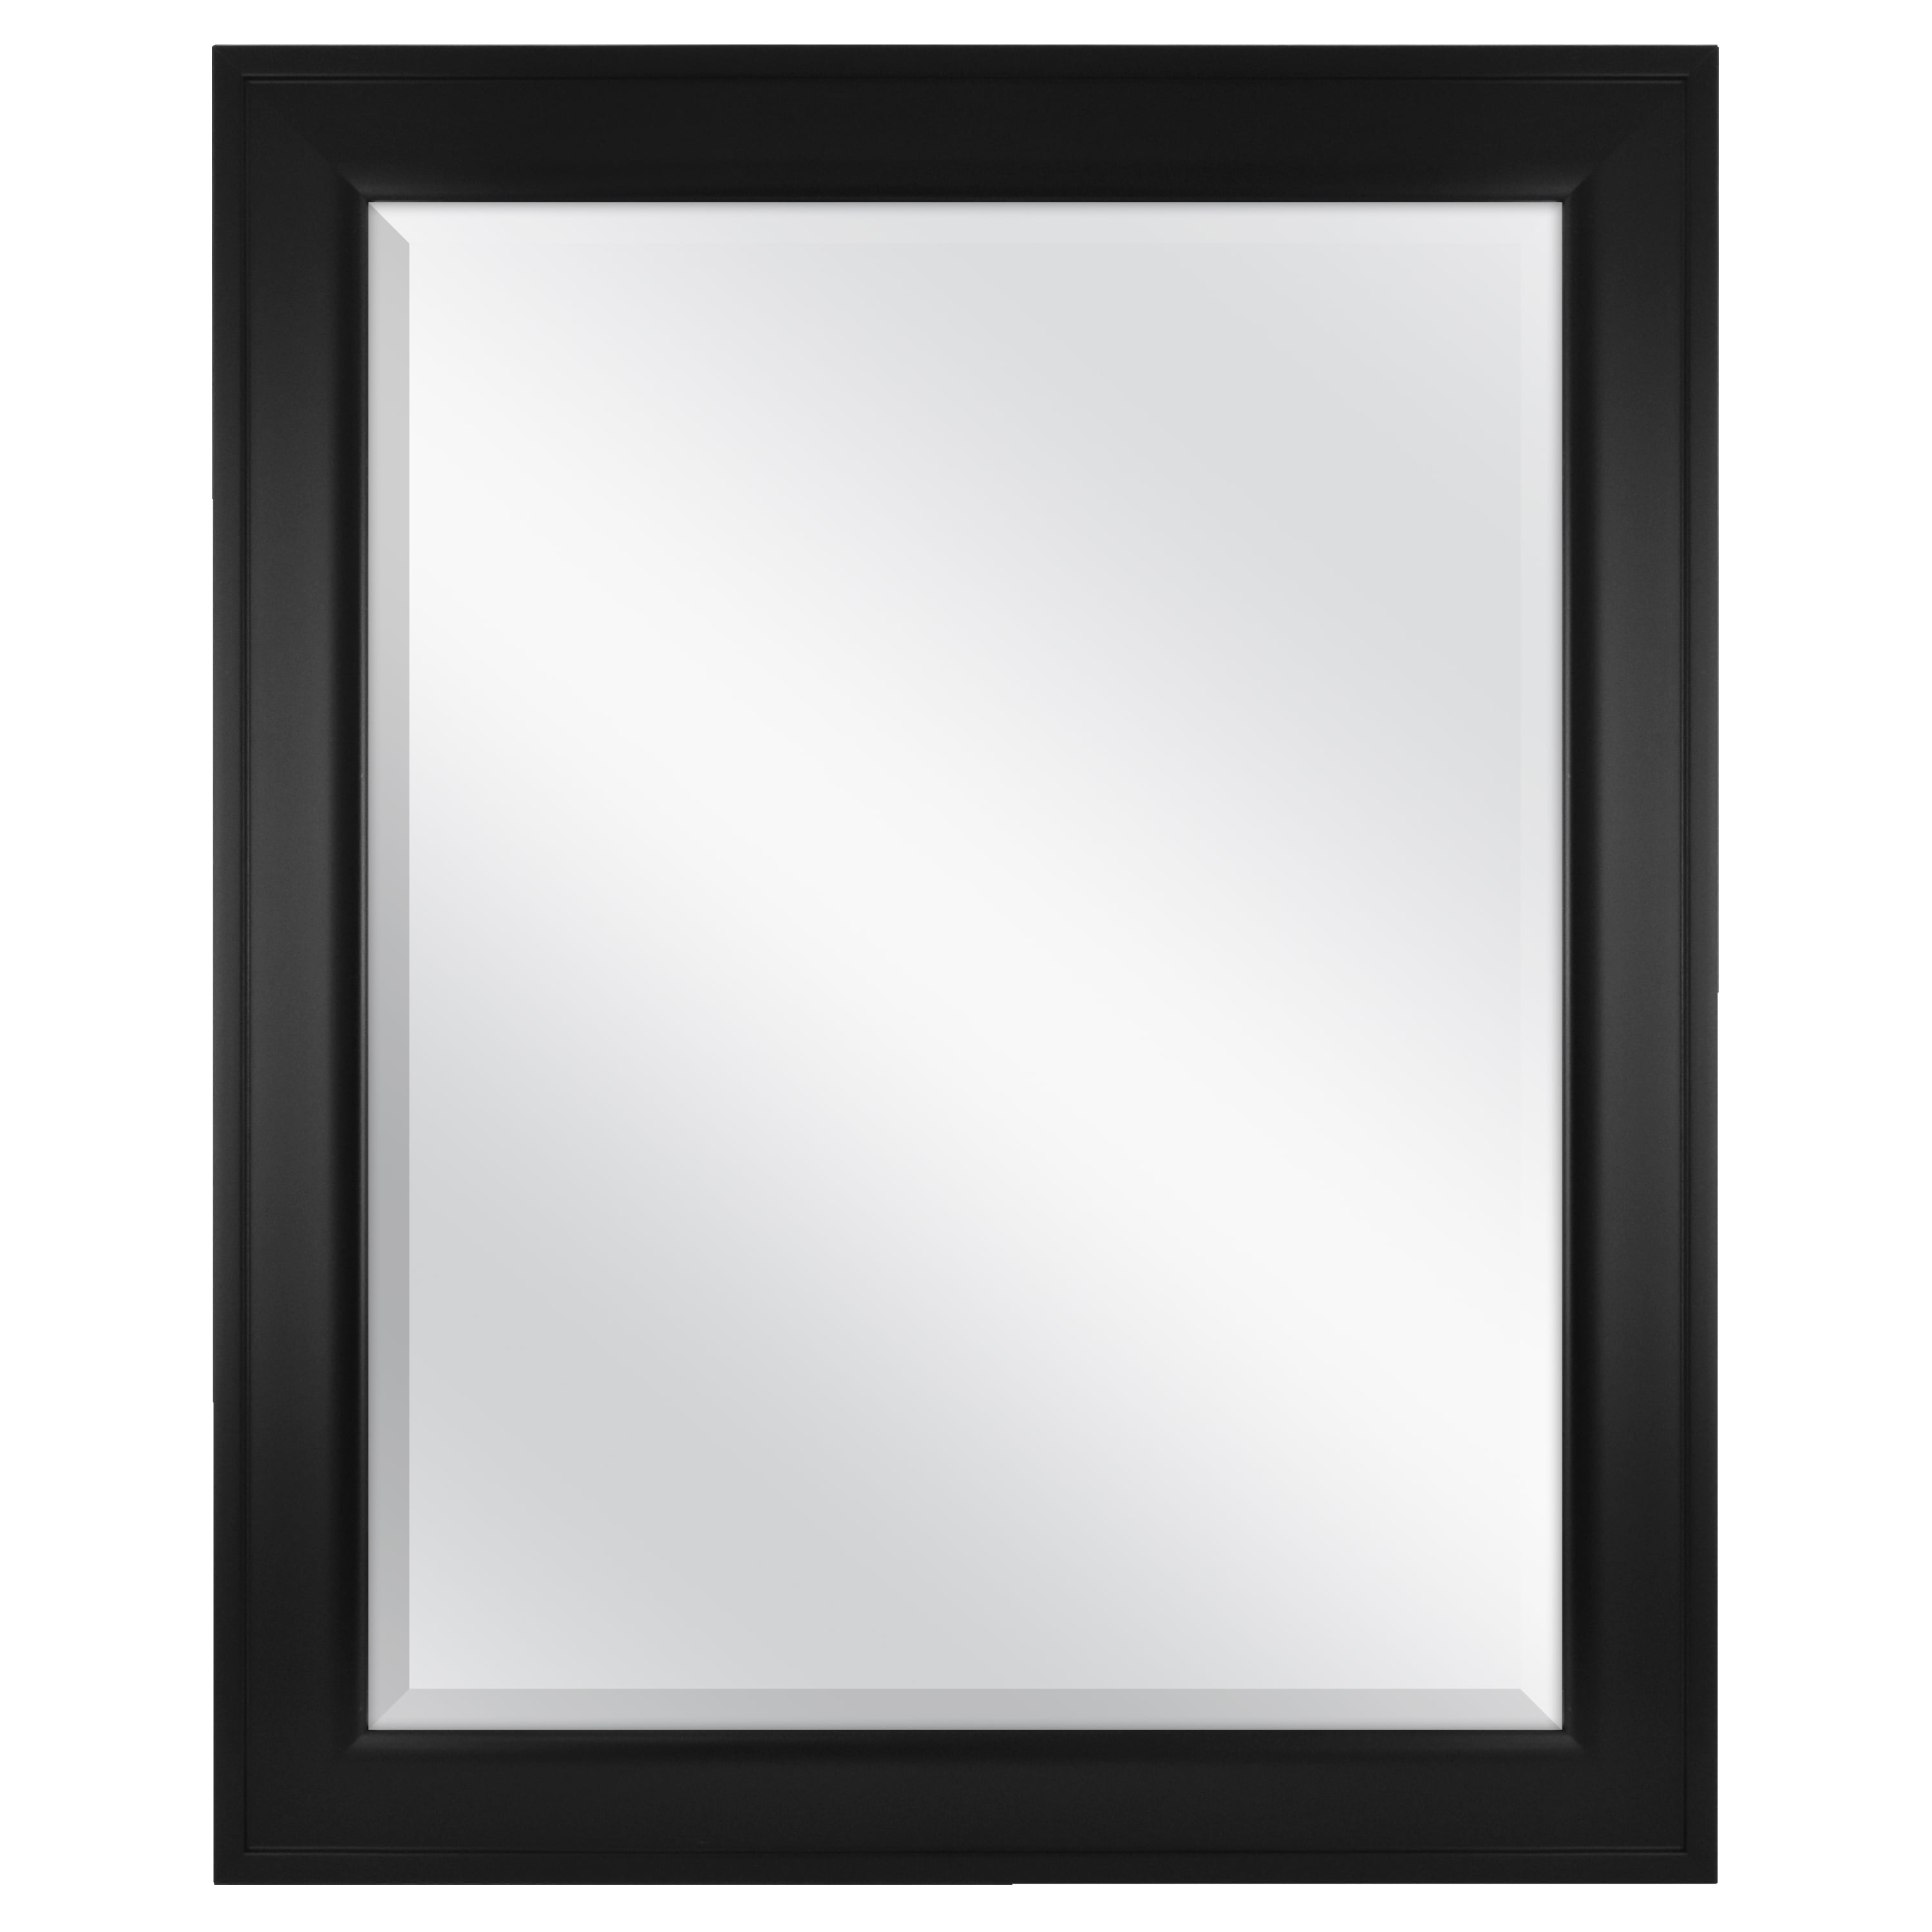 Mainstays Bevelled Wall Mirror 23 X, How To Hang Mainstays Beveled Mirror